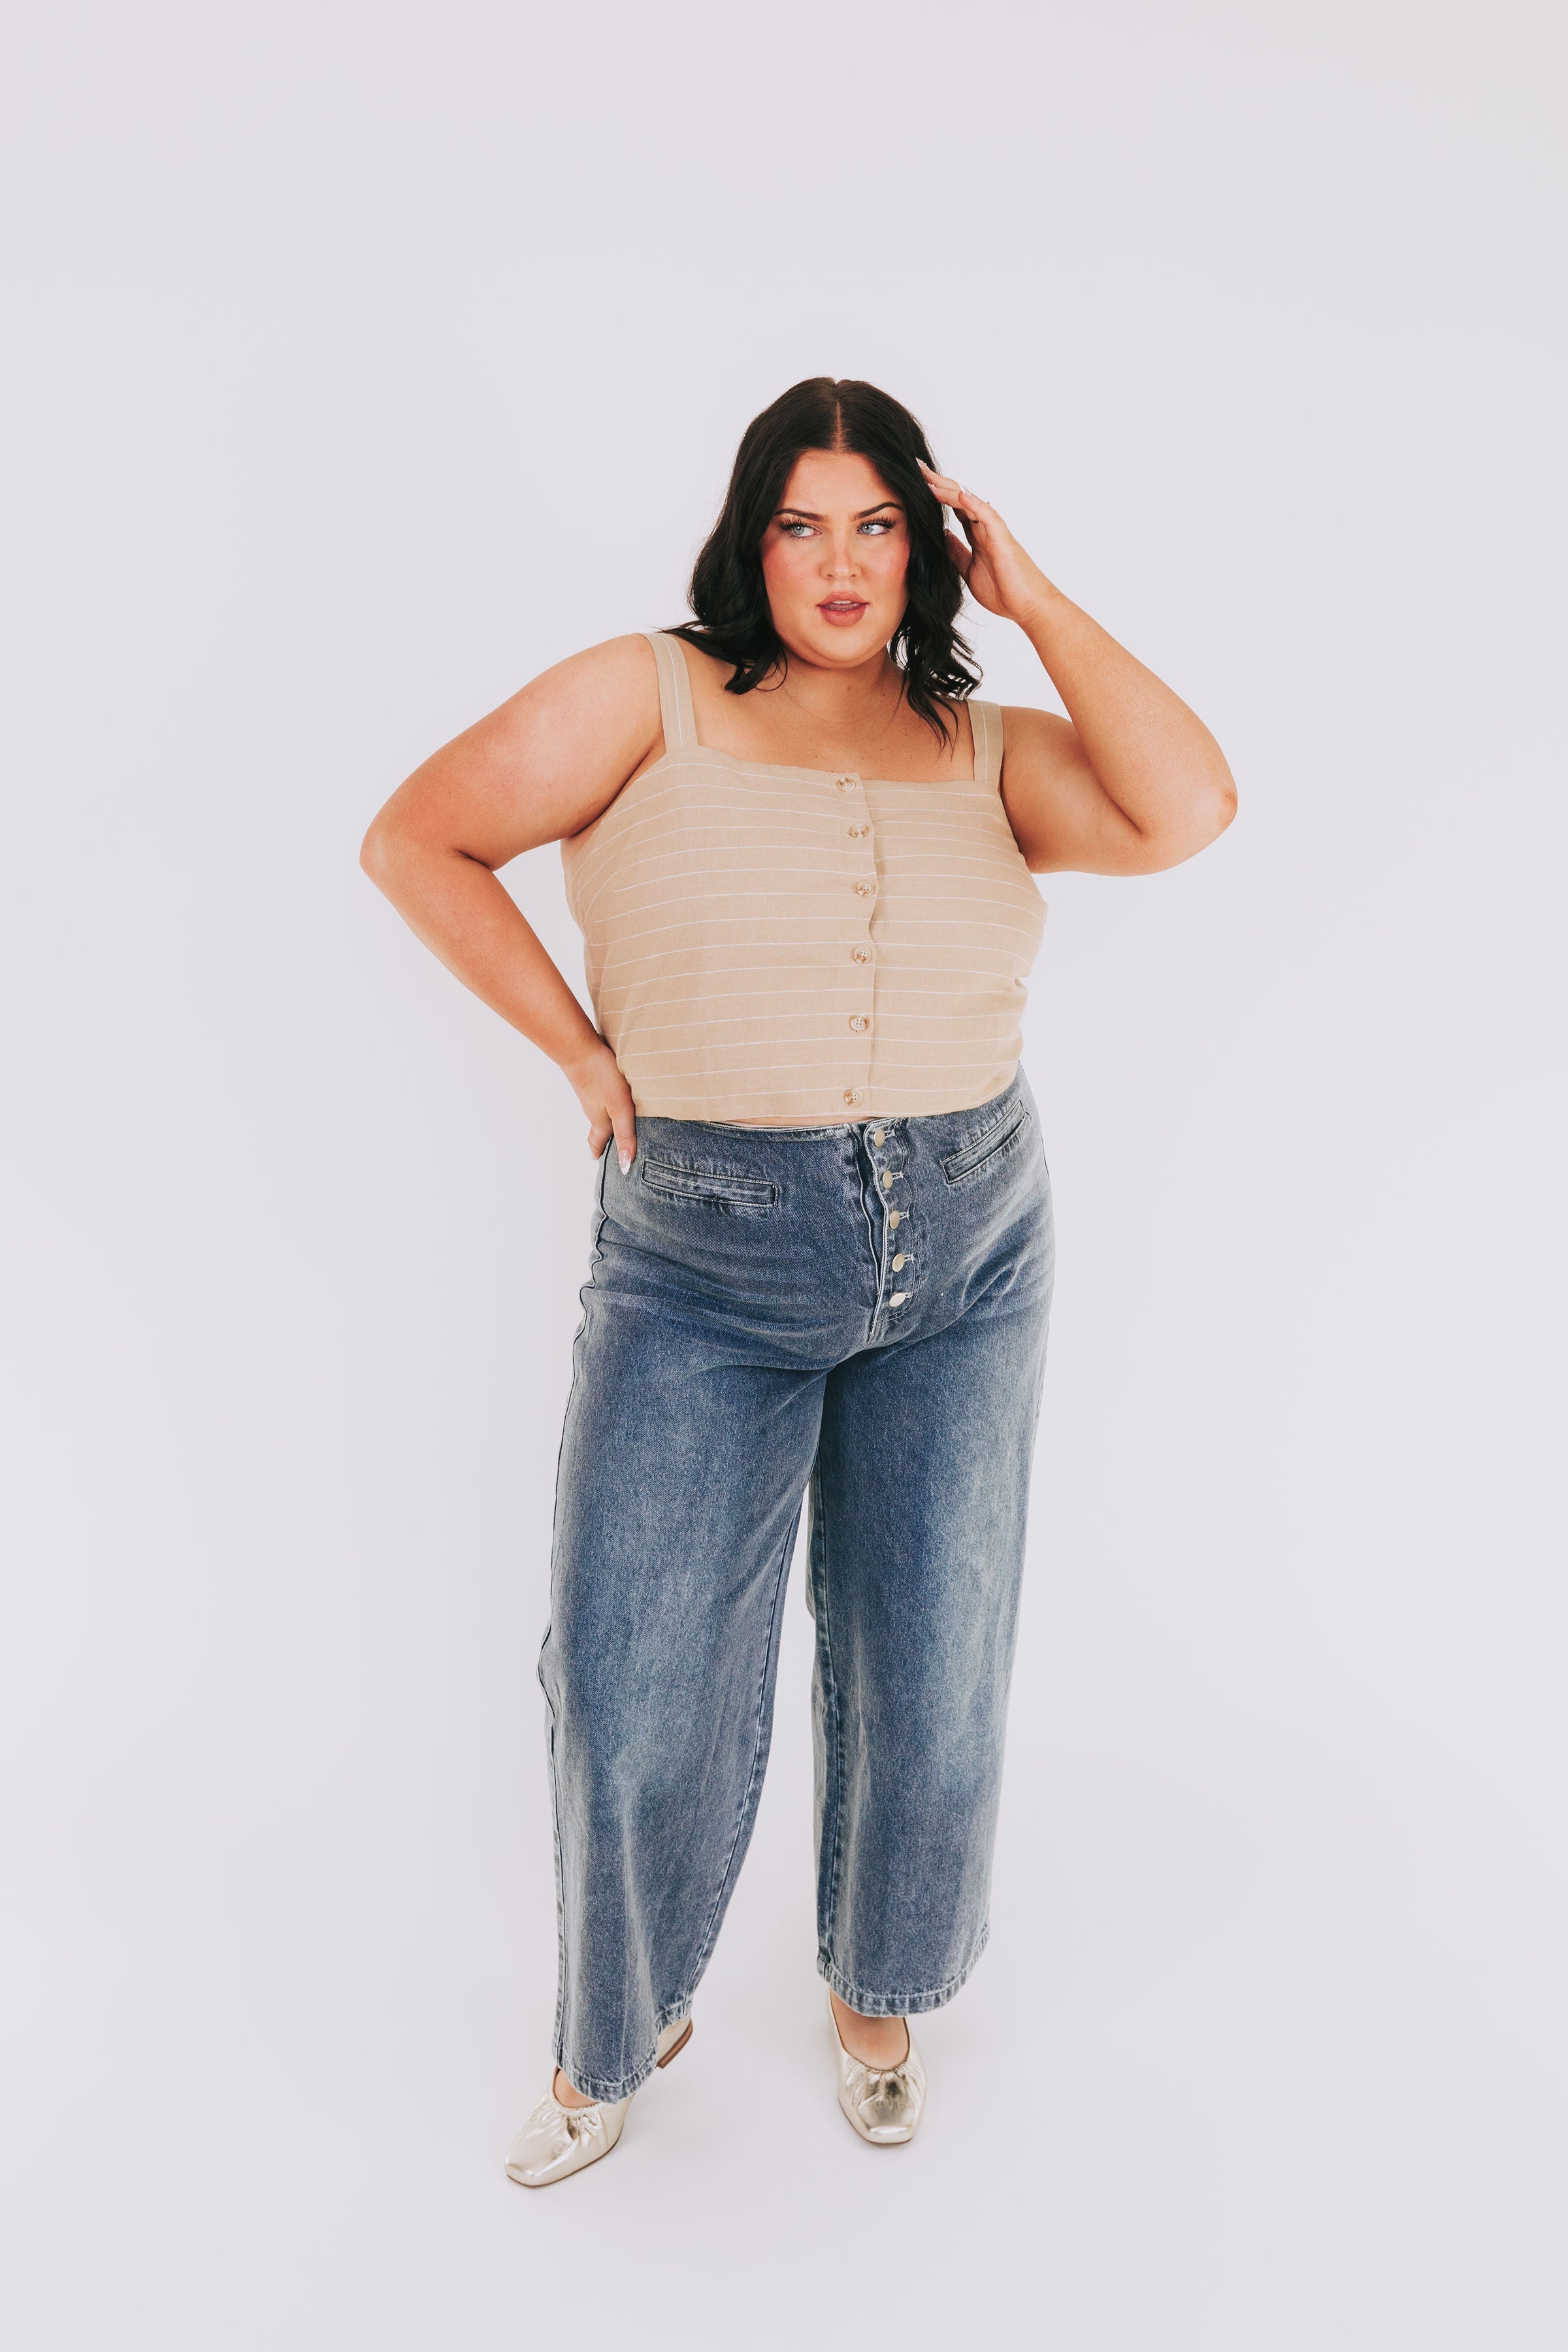 PLUS SIZE - Like You A Latte Top